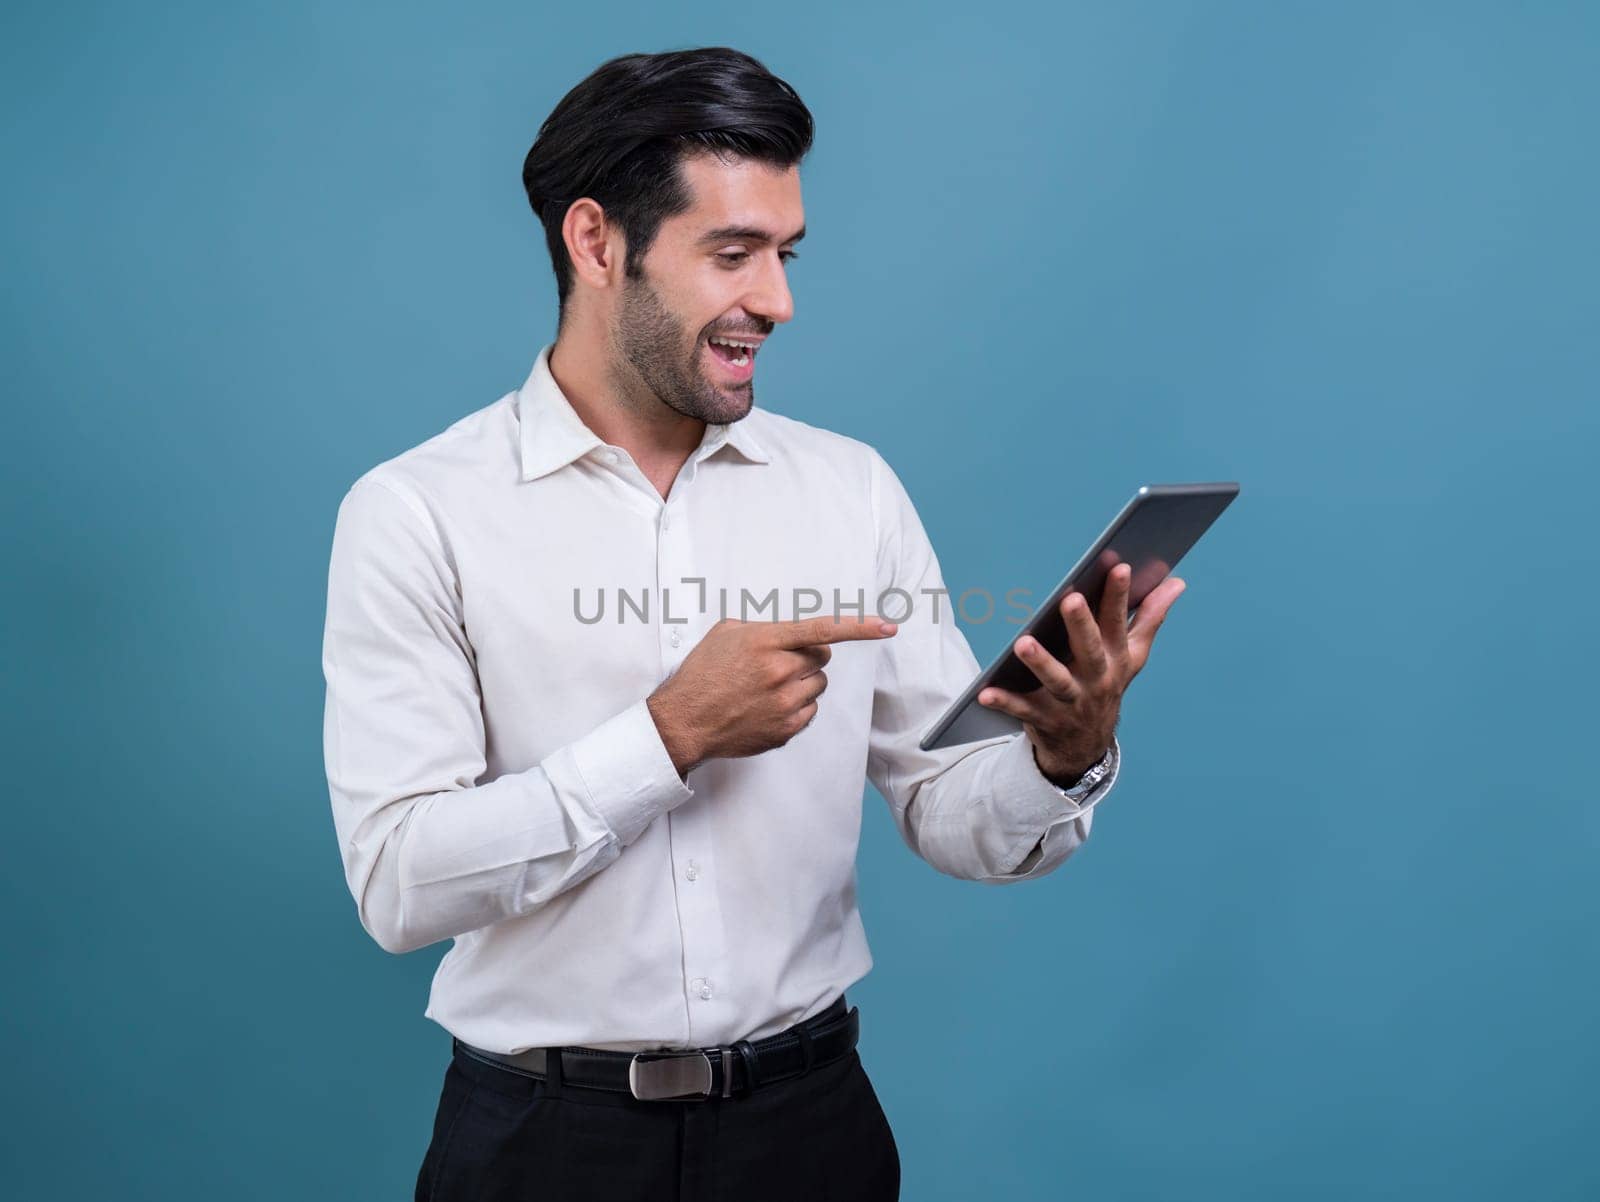 Confident businessman in formal suit holding tablet with surprise look for promotion or advertising. Facial expression and gestures indicate excitement and amazement on an isolated background. Fervent